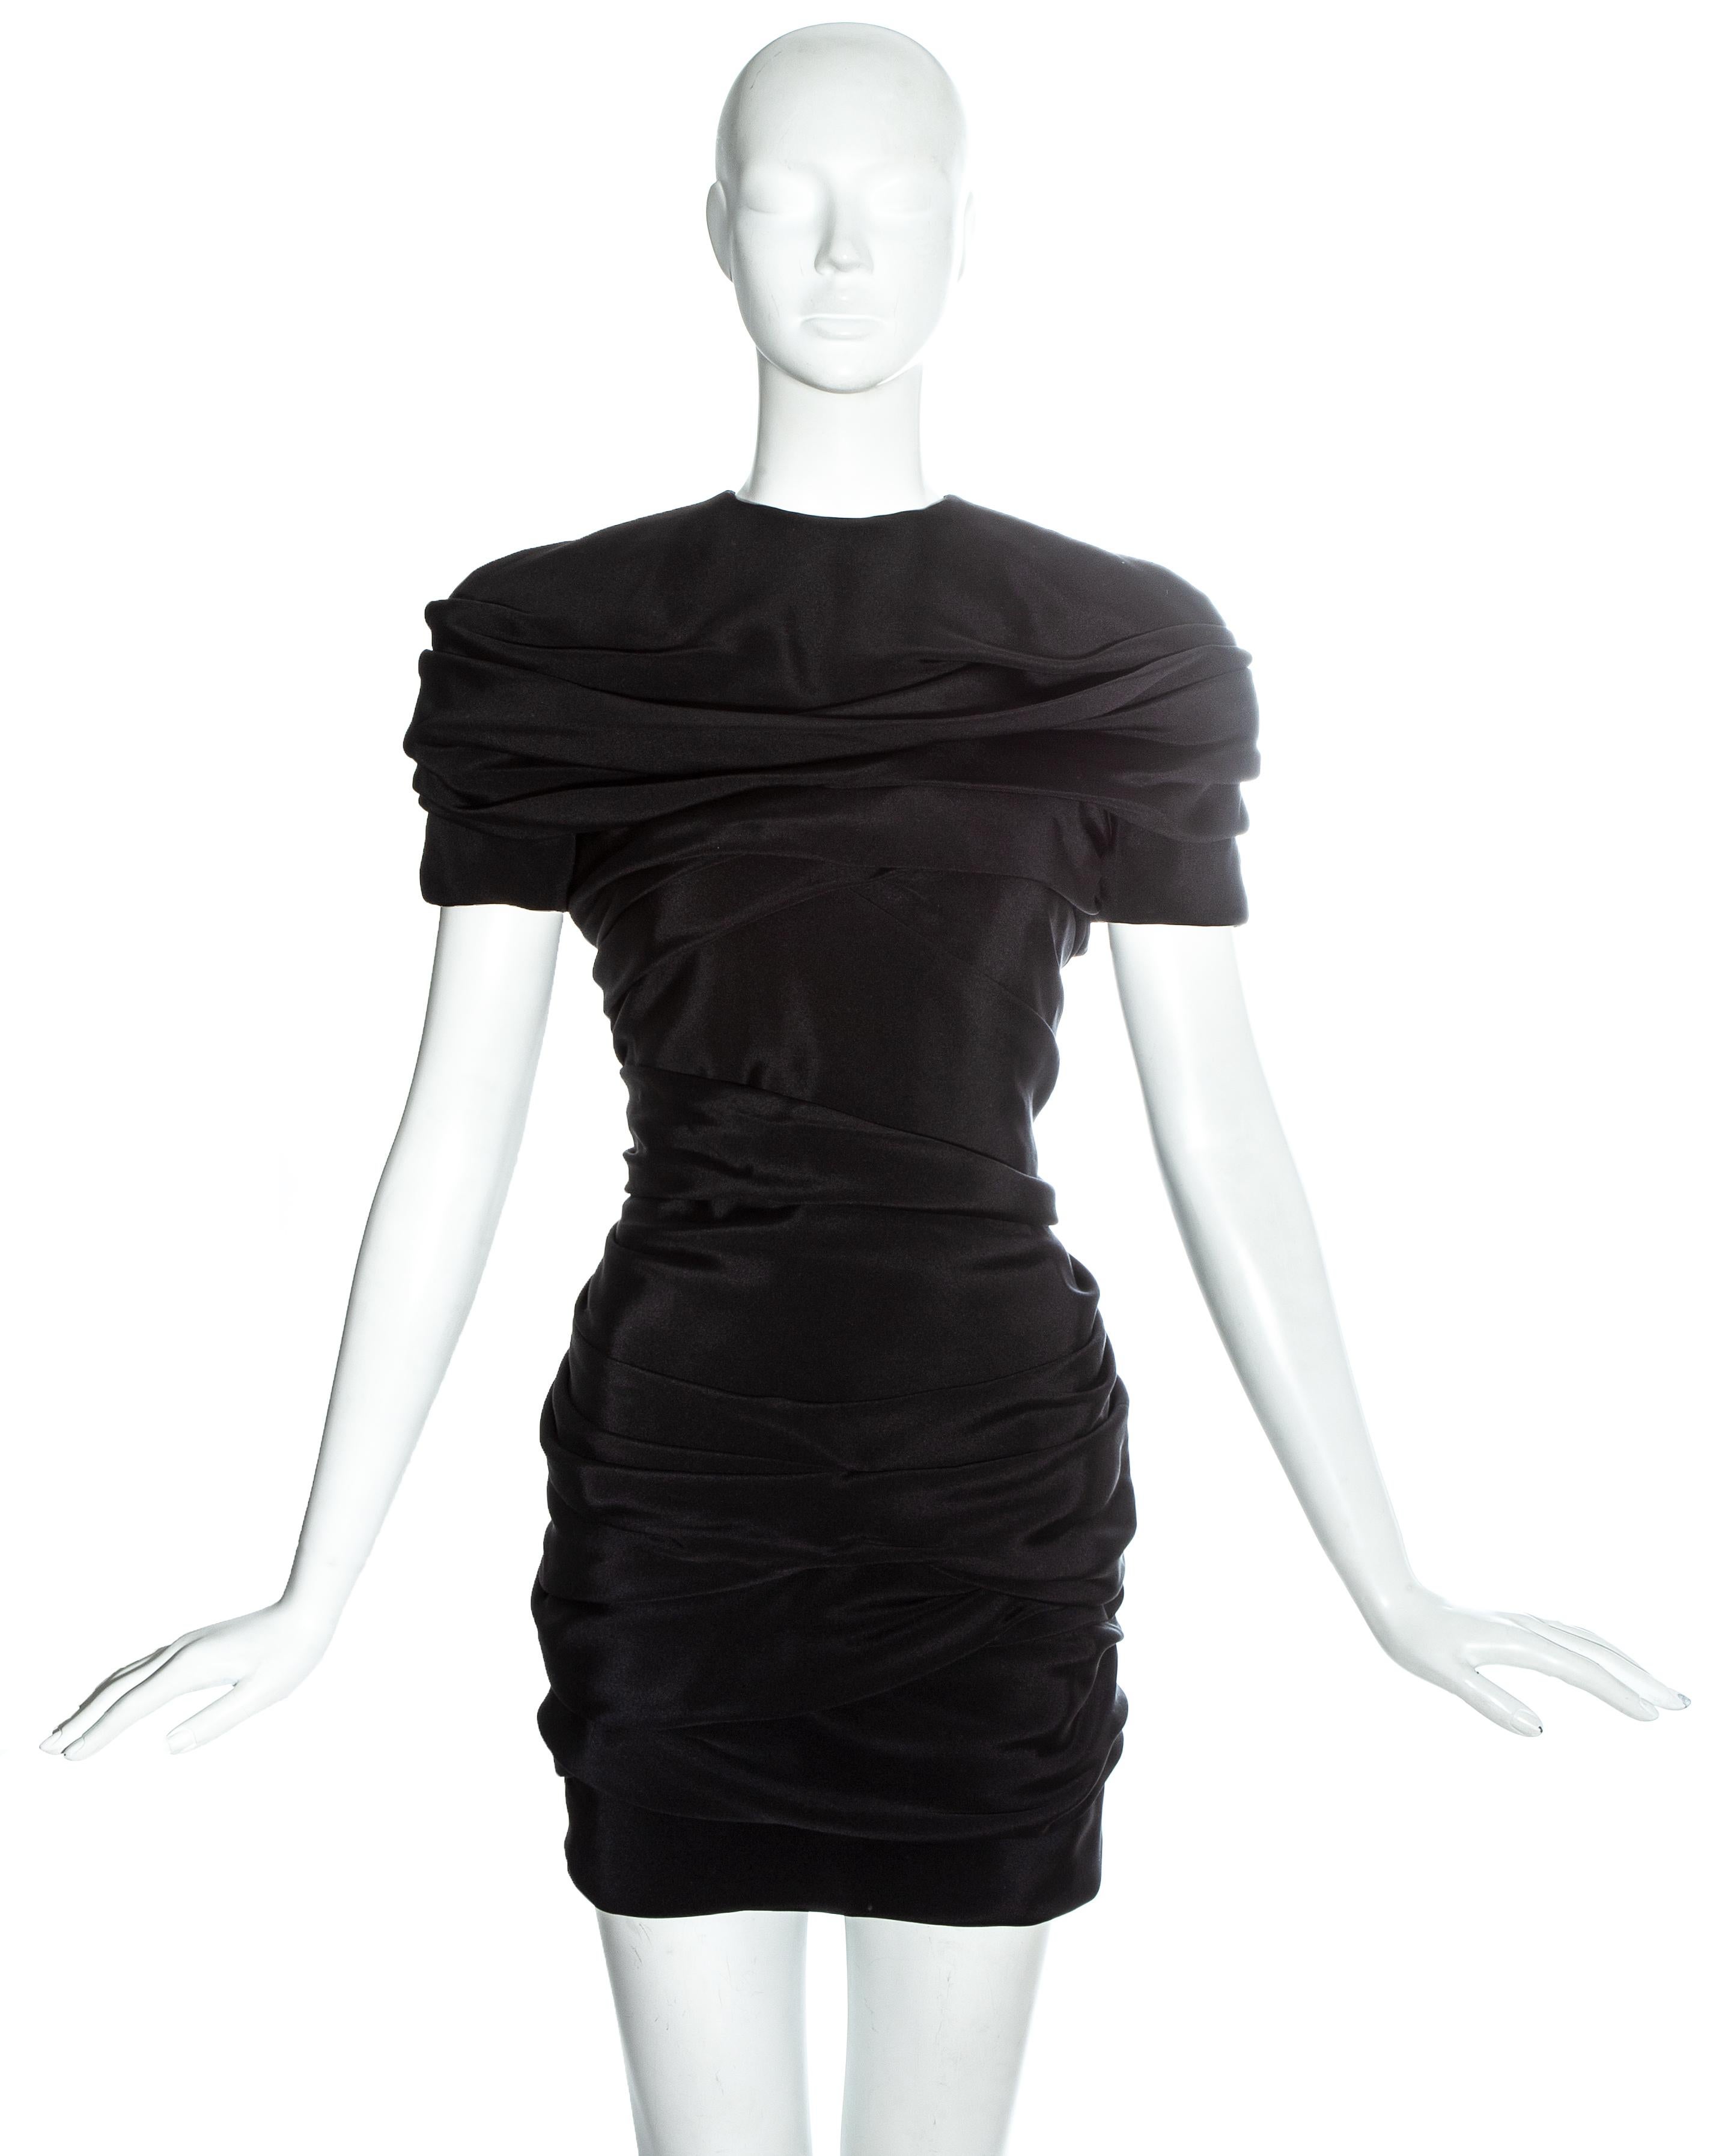 Gianni Versace black silk ruched mini dress with shoulder pads, accentuated waist and intricate pleating along spine

Spring-Summer 1987